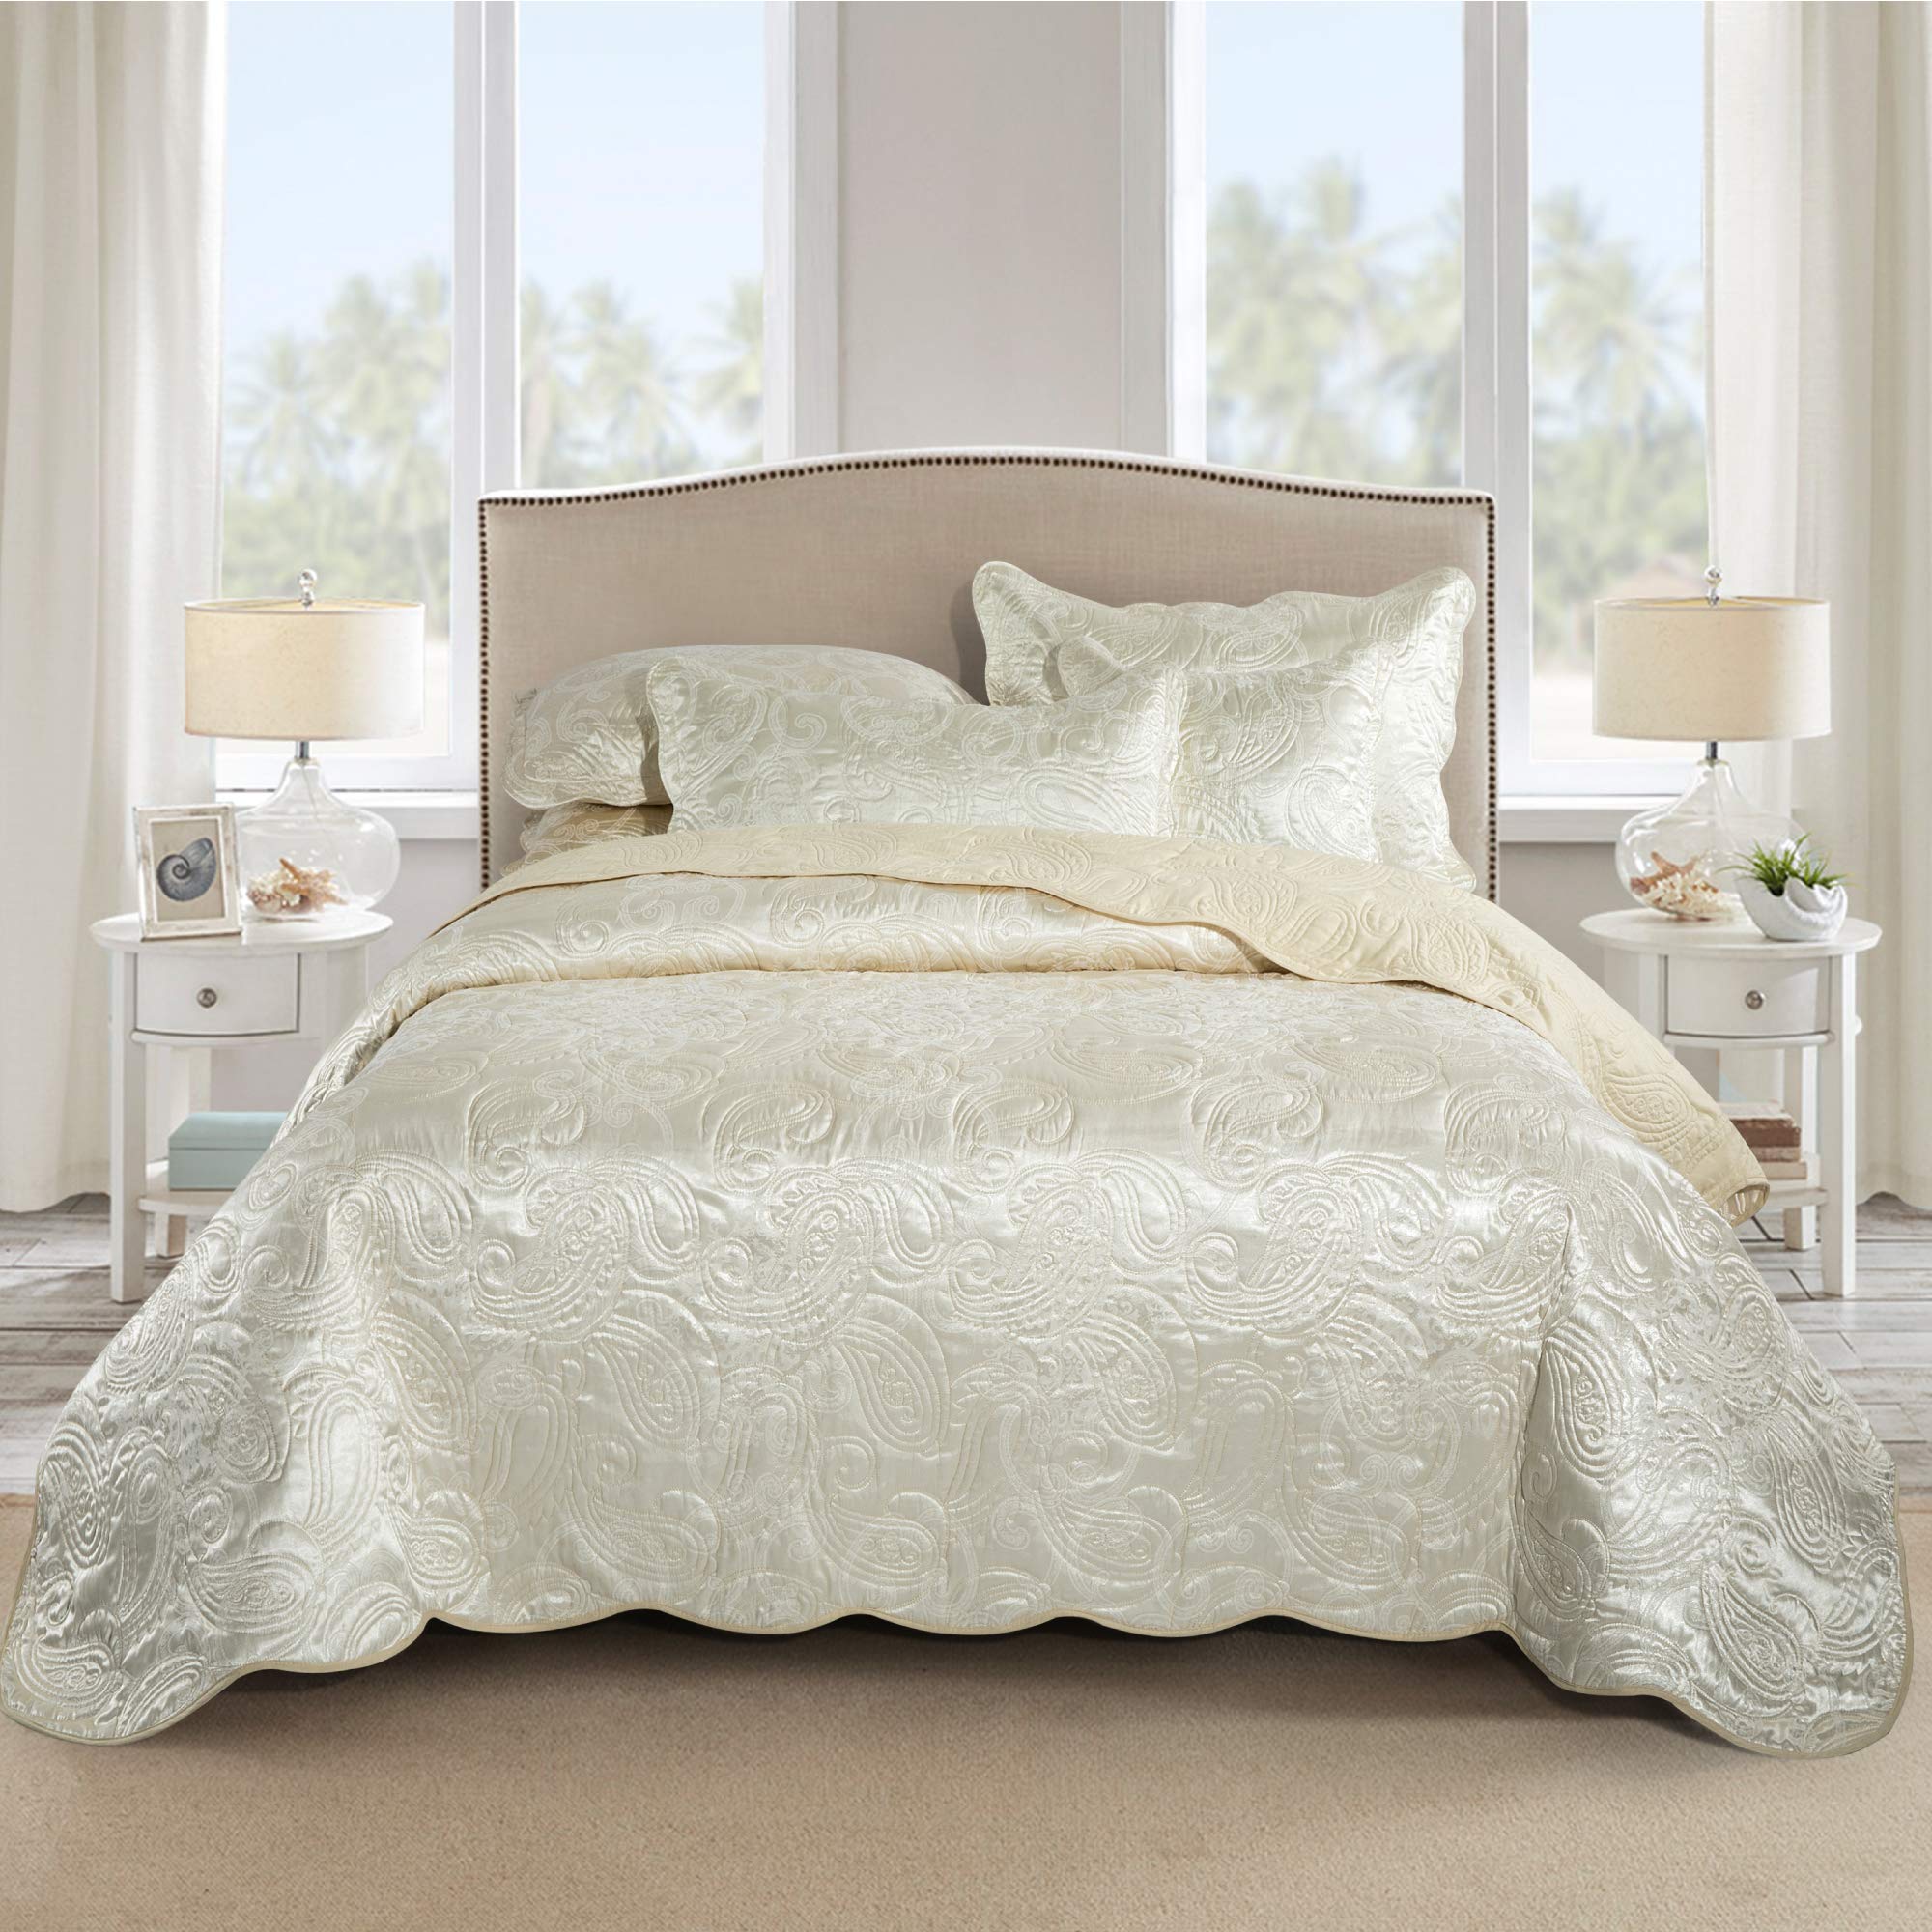 Hafaa Quilted Bedspread Double Size - with 2 Pillow Shams Satin Jacquard Embroidered Pattern 220x240cm (Cream)